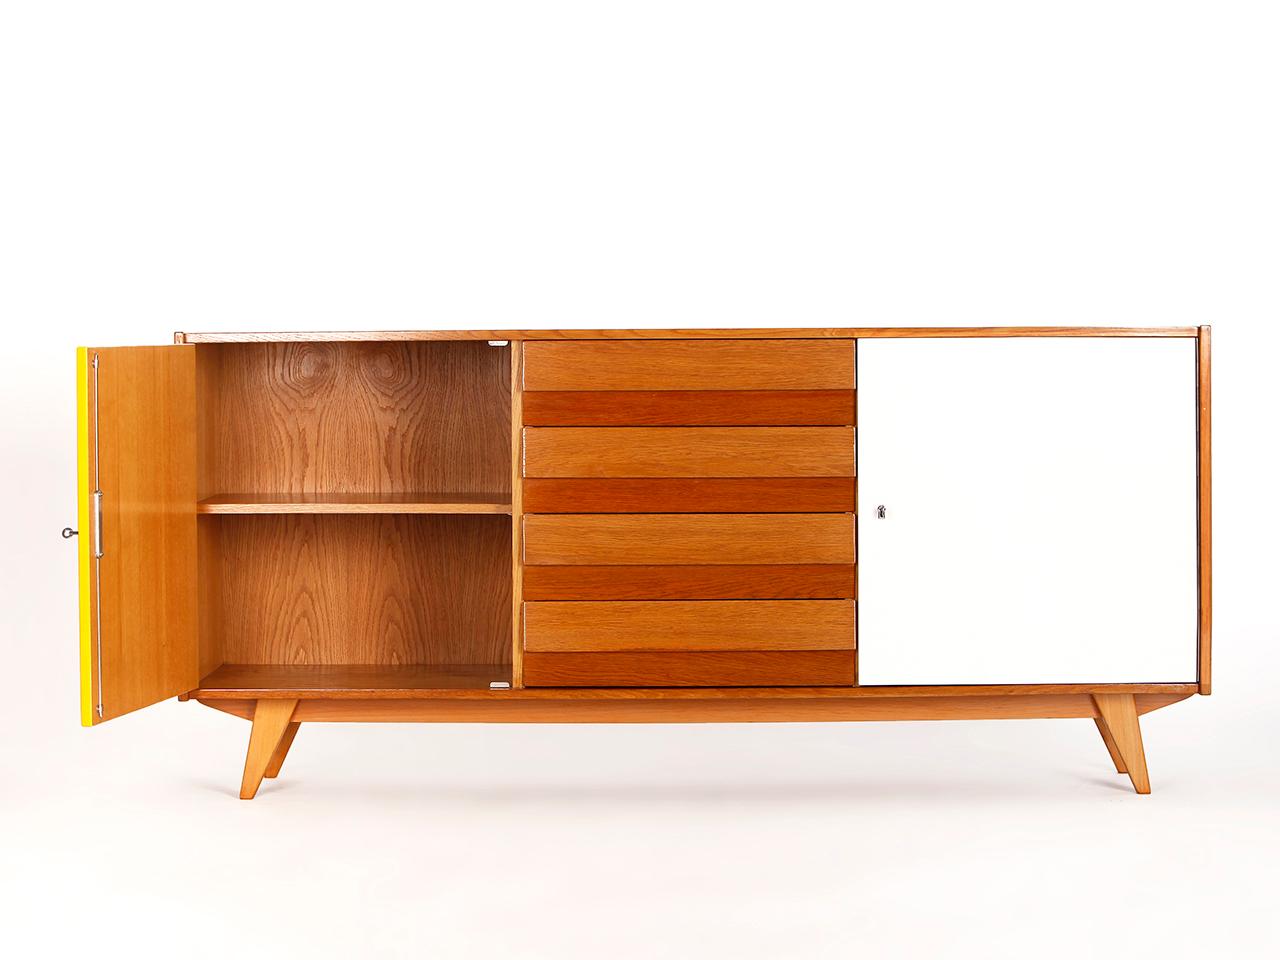 This model U-460 sideboard was designed by Jiri Jiroutek for Interier Praha in former Czechoslovakia. Produced in the 1960s.  Completely restored and repainted. Excellent condition. Delivery time 3-5 weeks.
